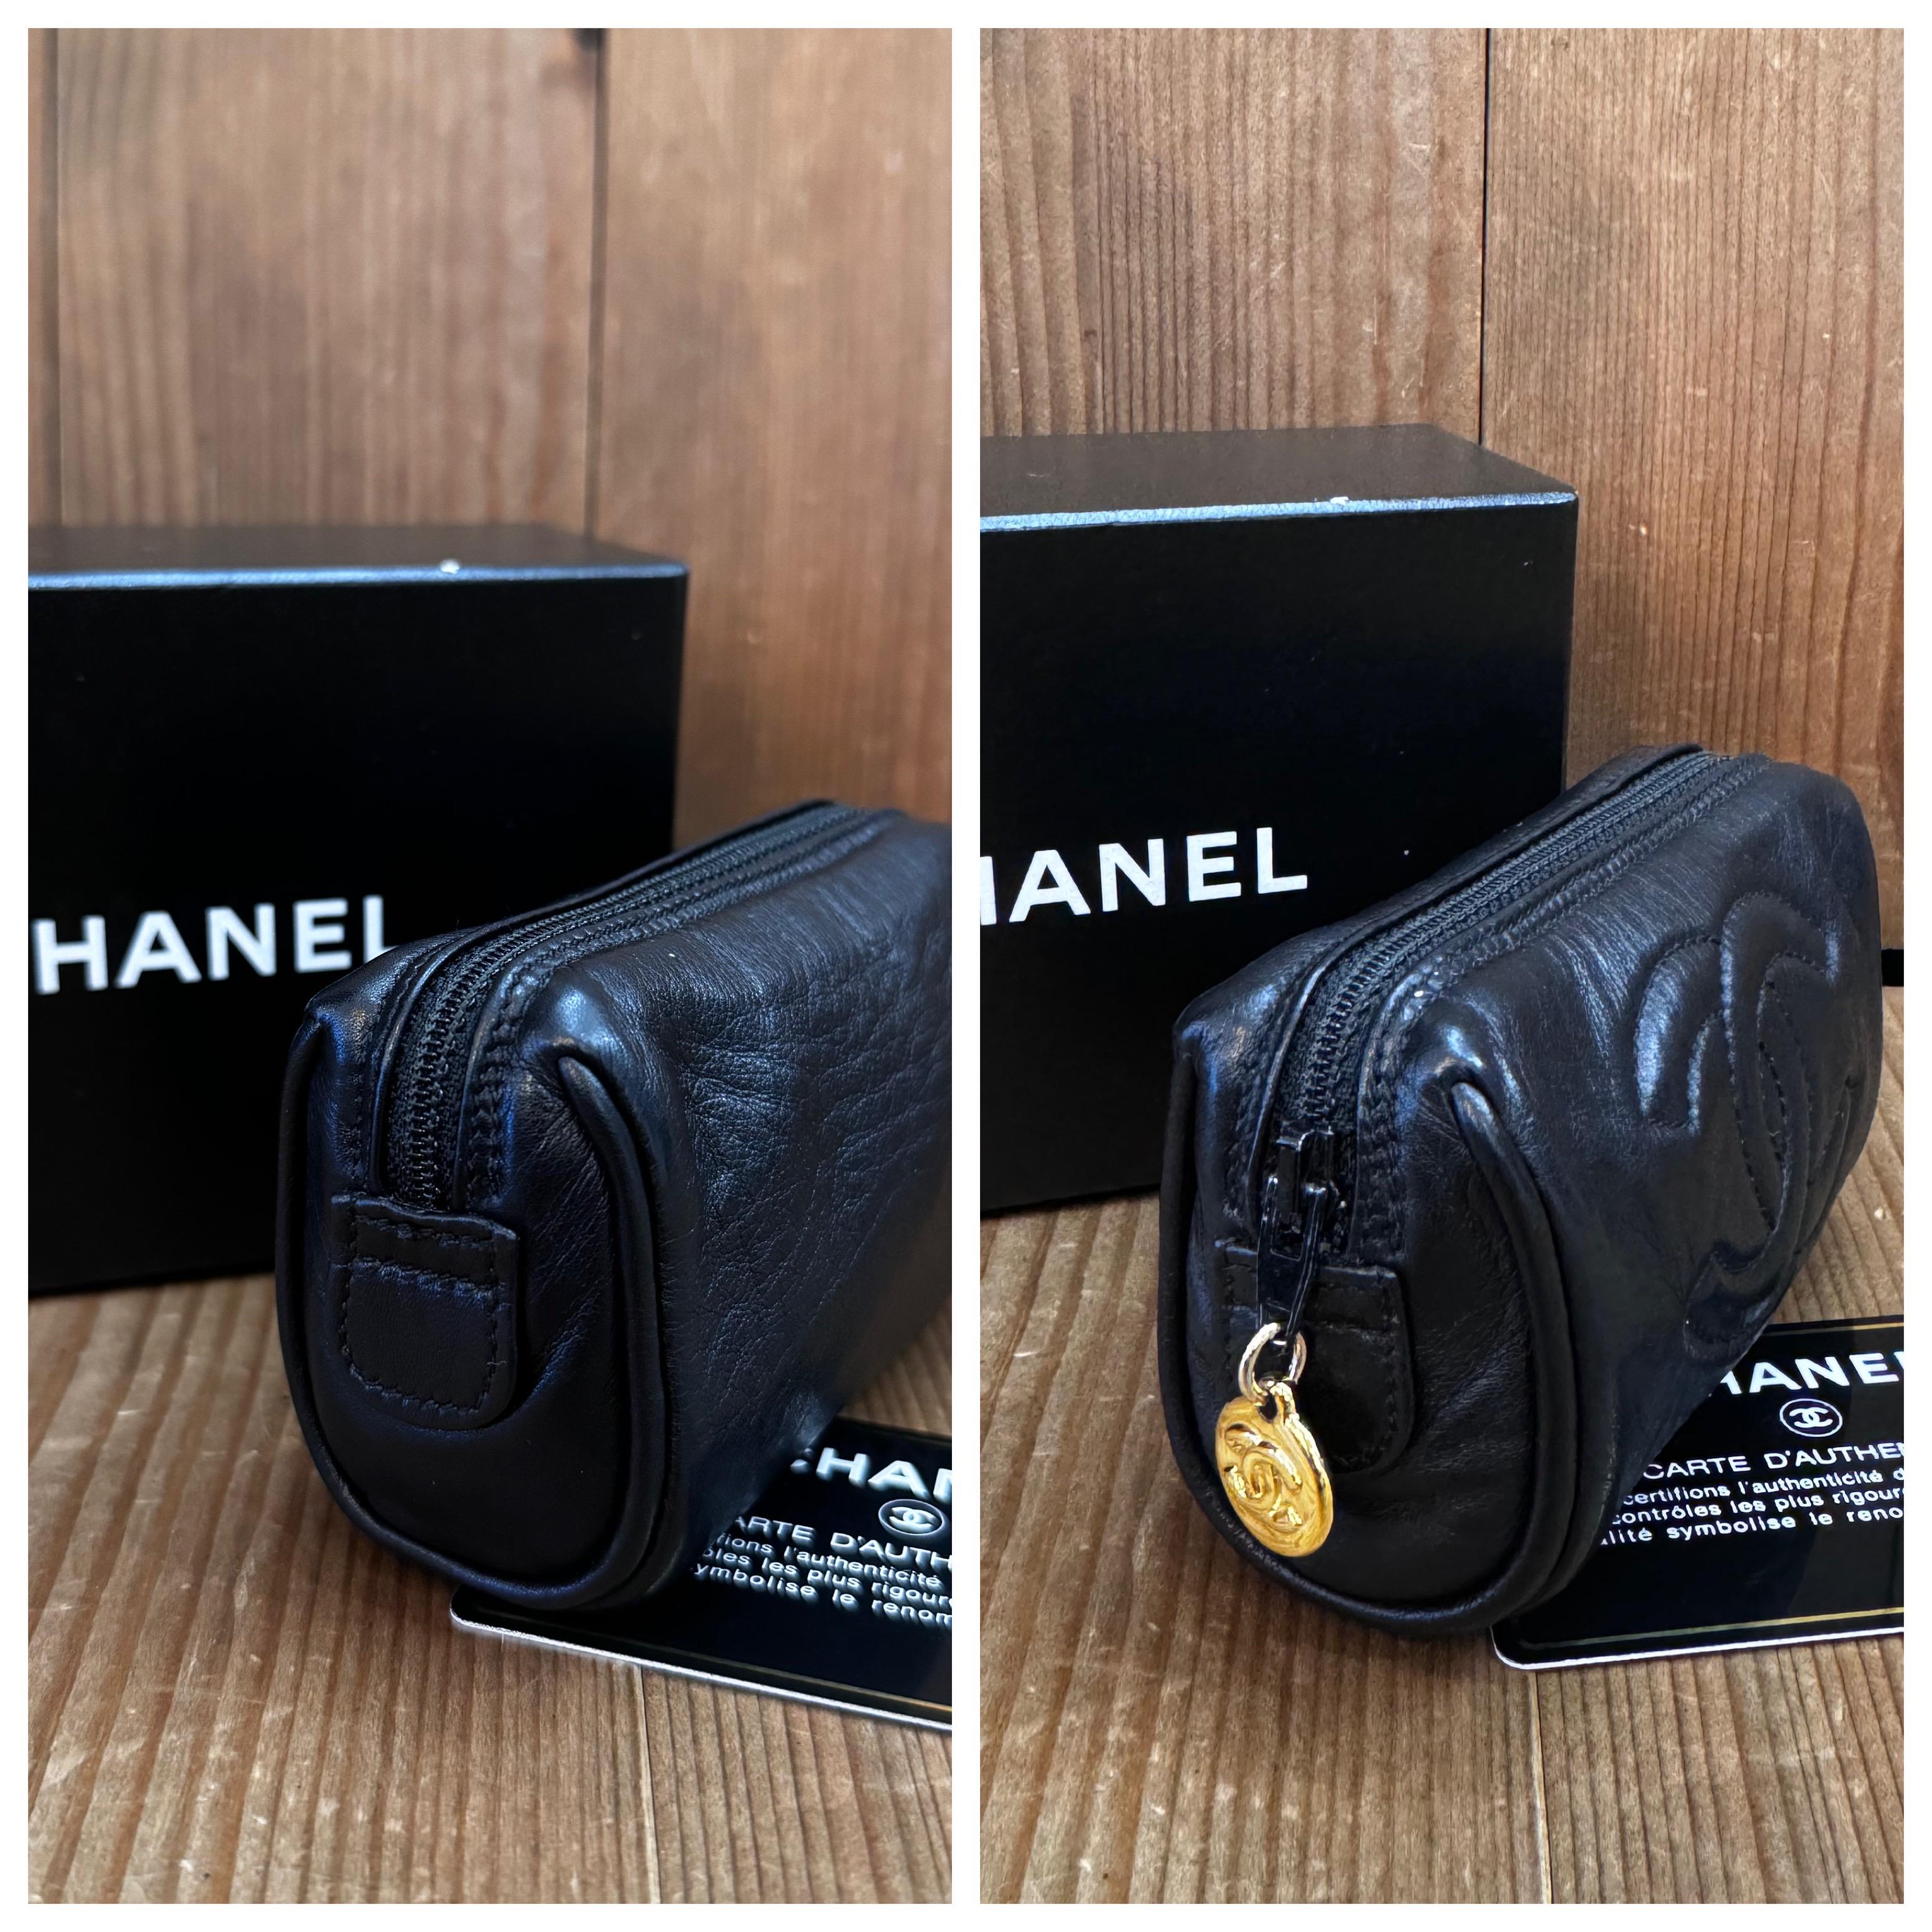 1996 Vintage CHANEL Mini Calfskin Leather Lipstick Coin Pouch Black In Good Condition For Sale In Bangkok, TH